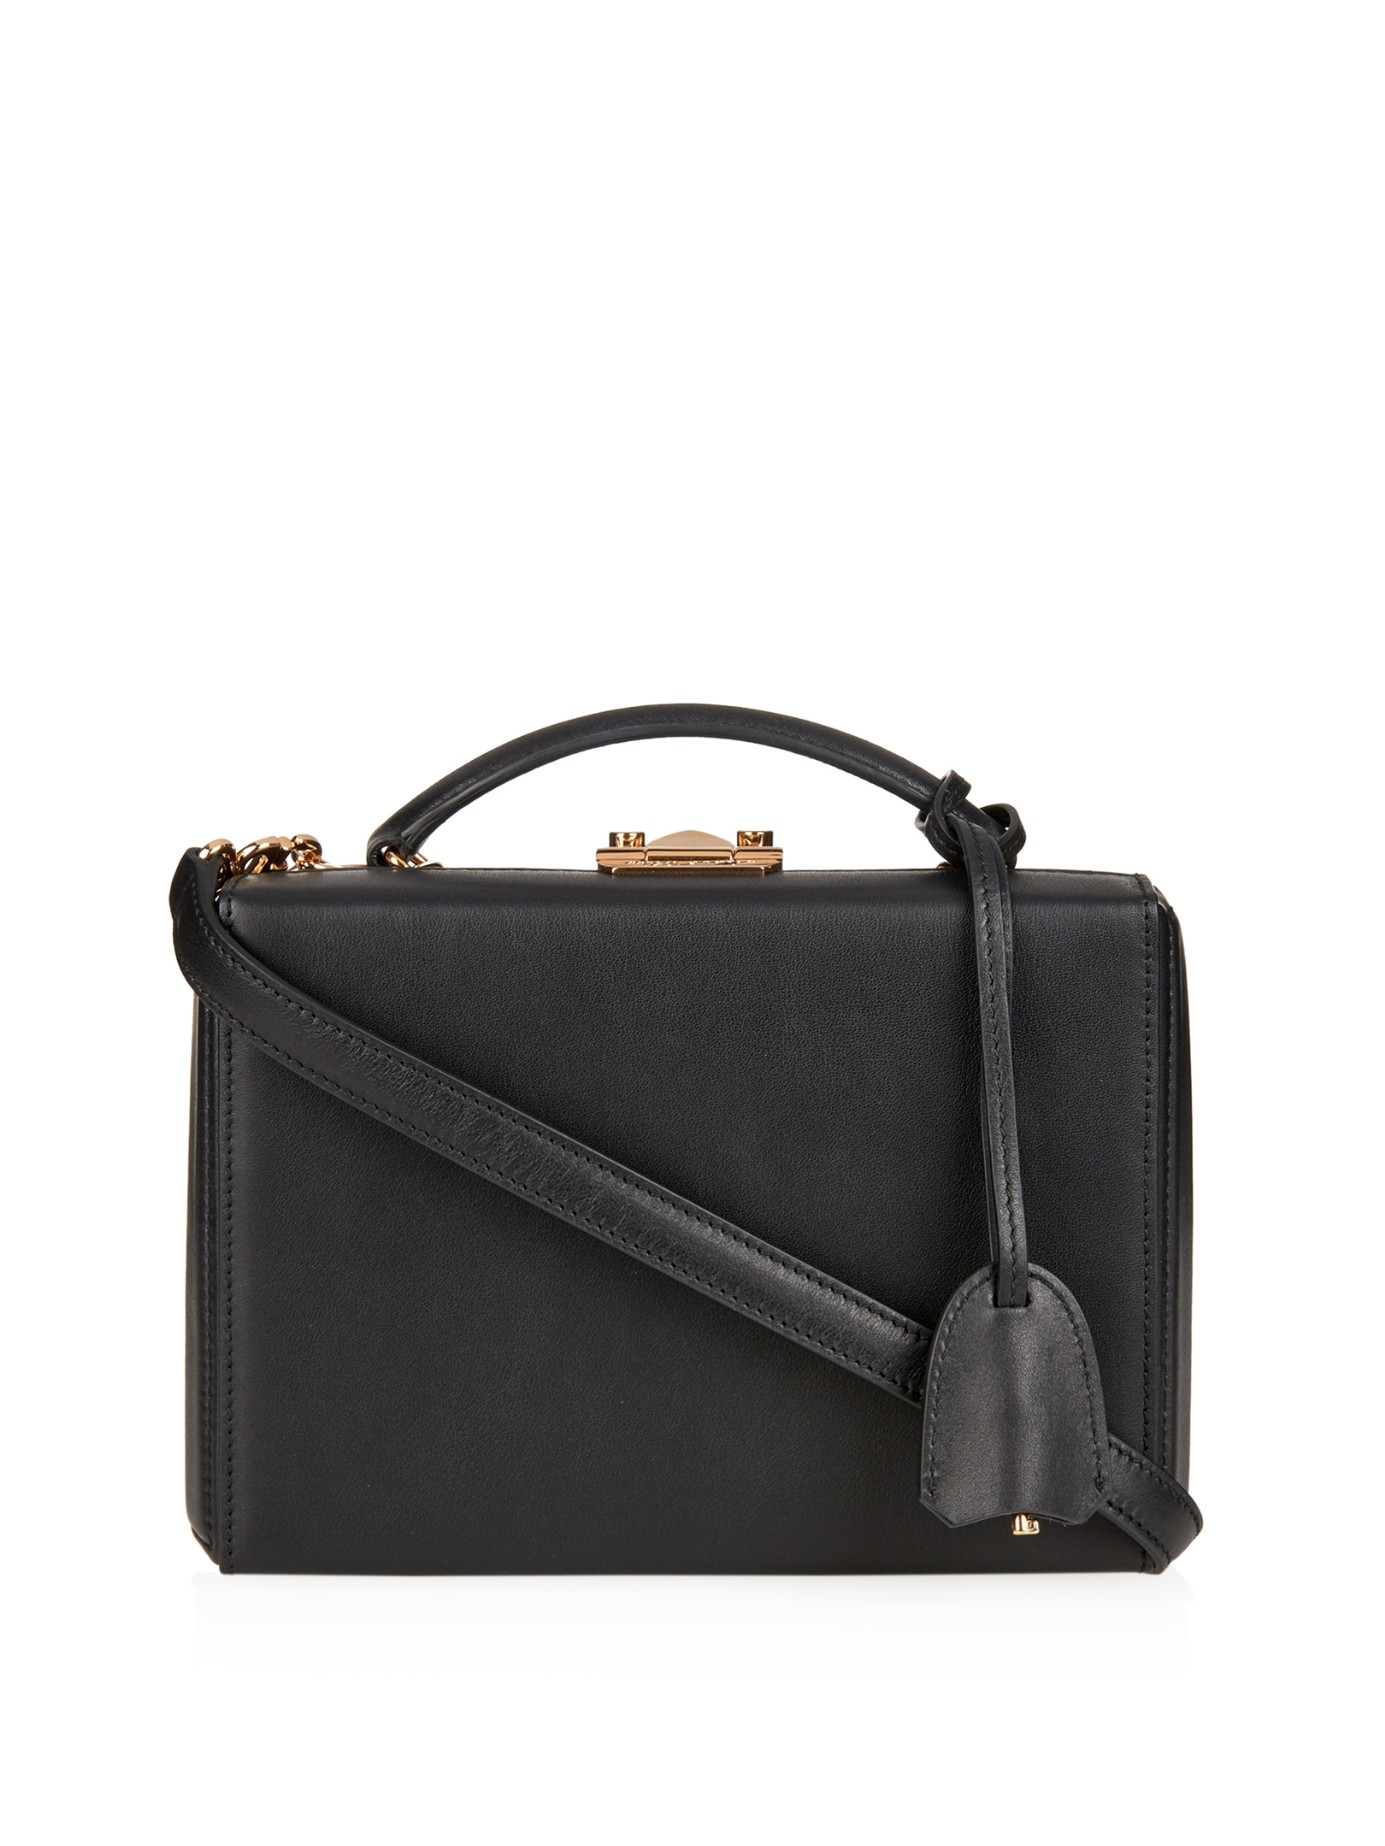 Mark cross Grace Small Leather Box Bag in Black | Lyst